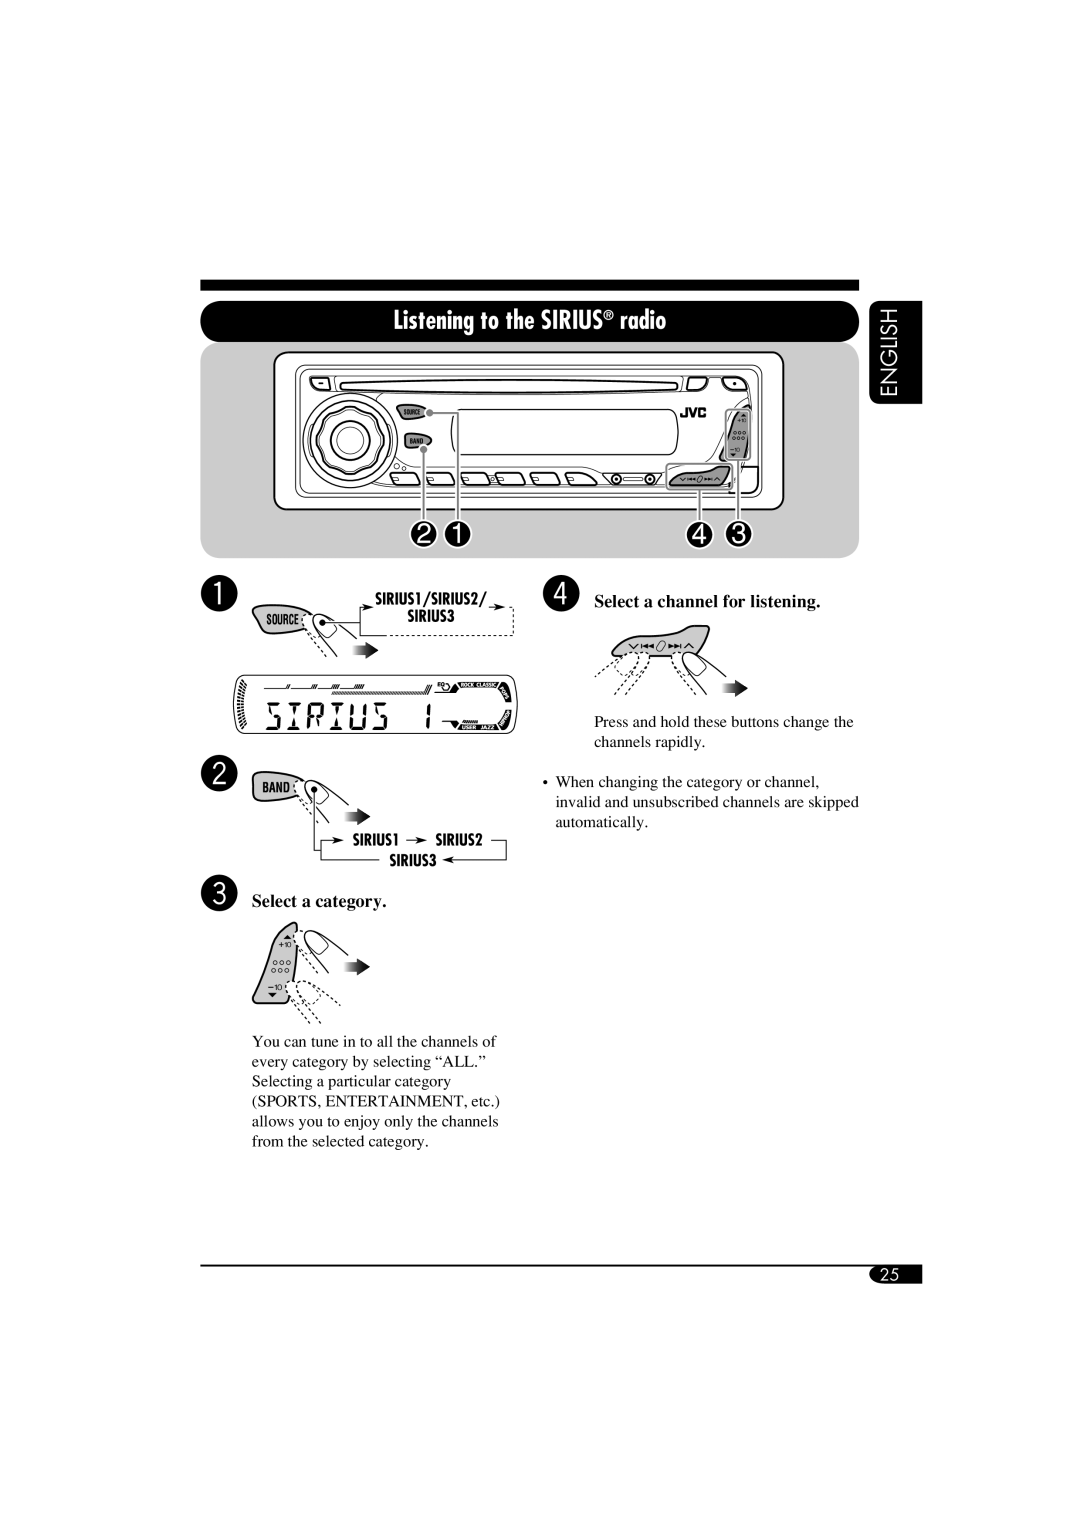 JVC KD-G310, KD-AR360 manual Listening to the SIRIUS radio, English, ⁄Select a channel for listening, Select a category 